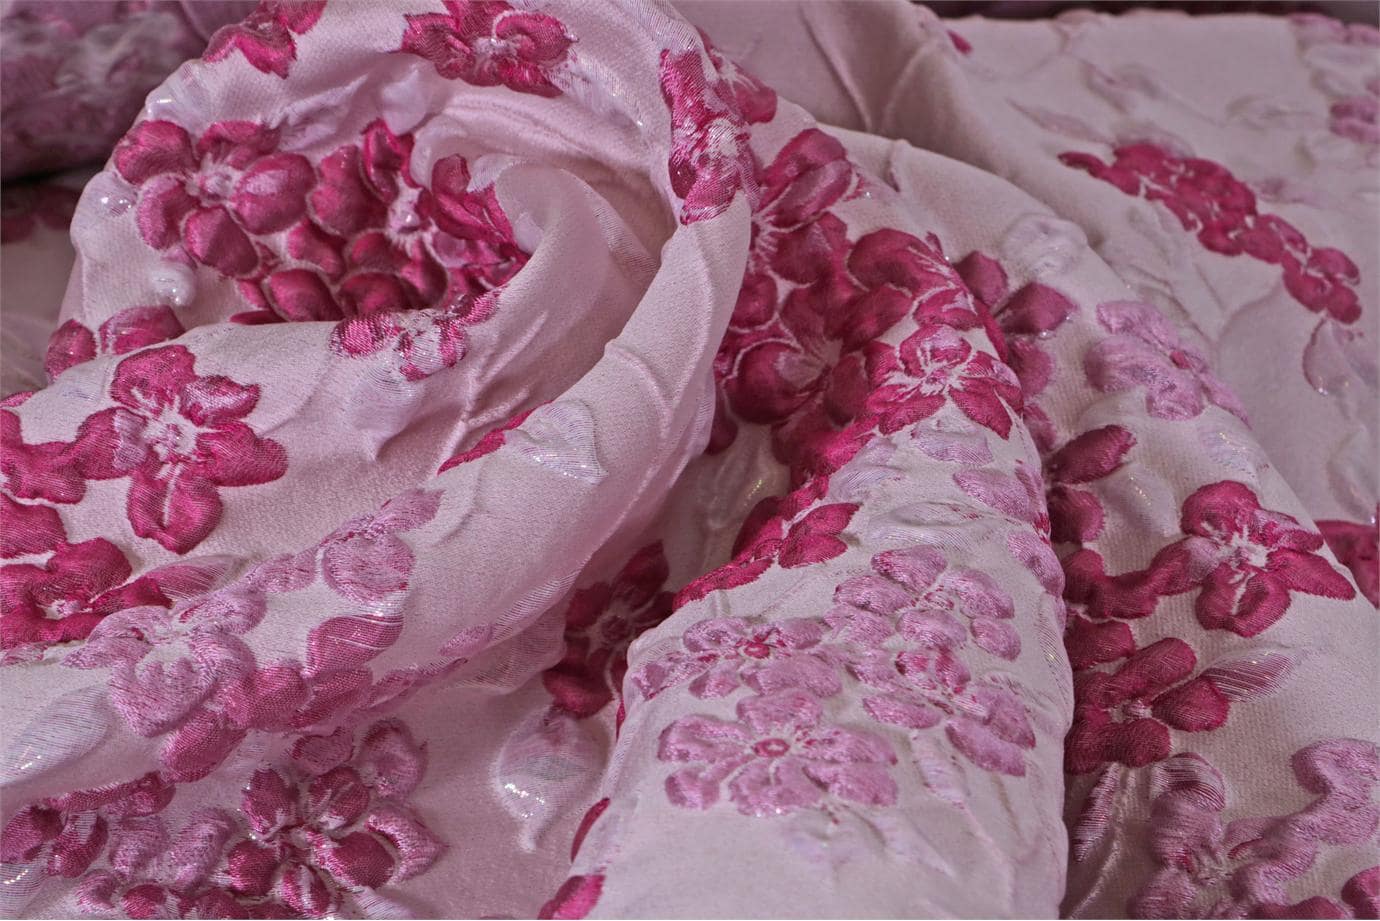 Floral jacquard fabric for special occasion dresses | new tess